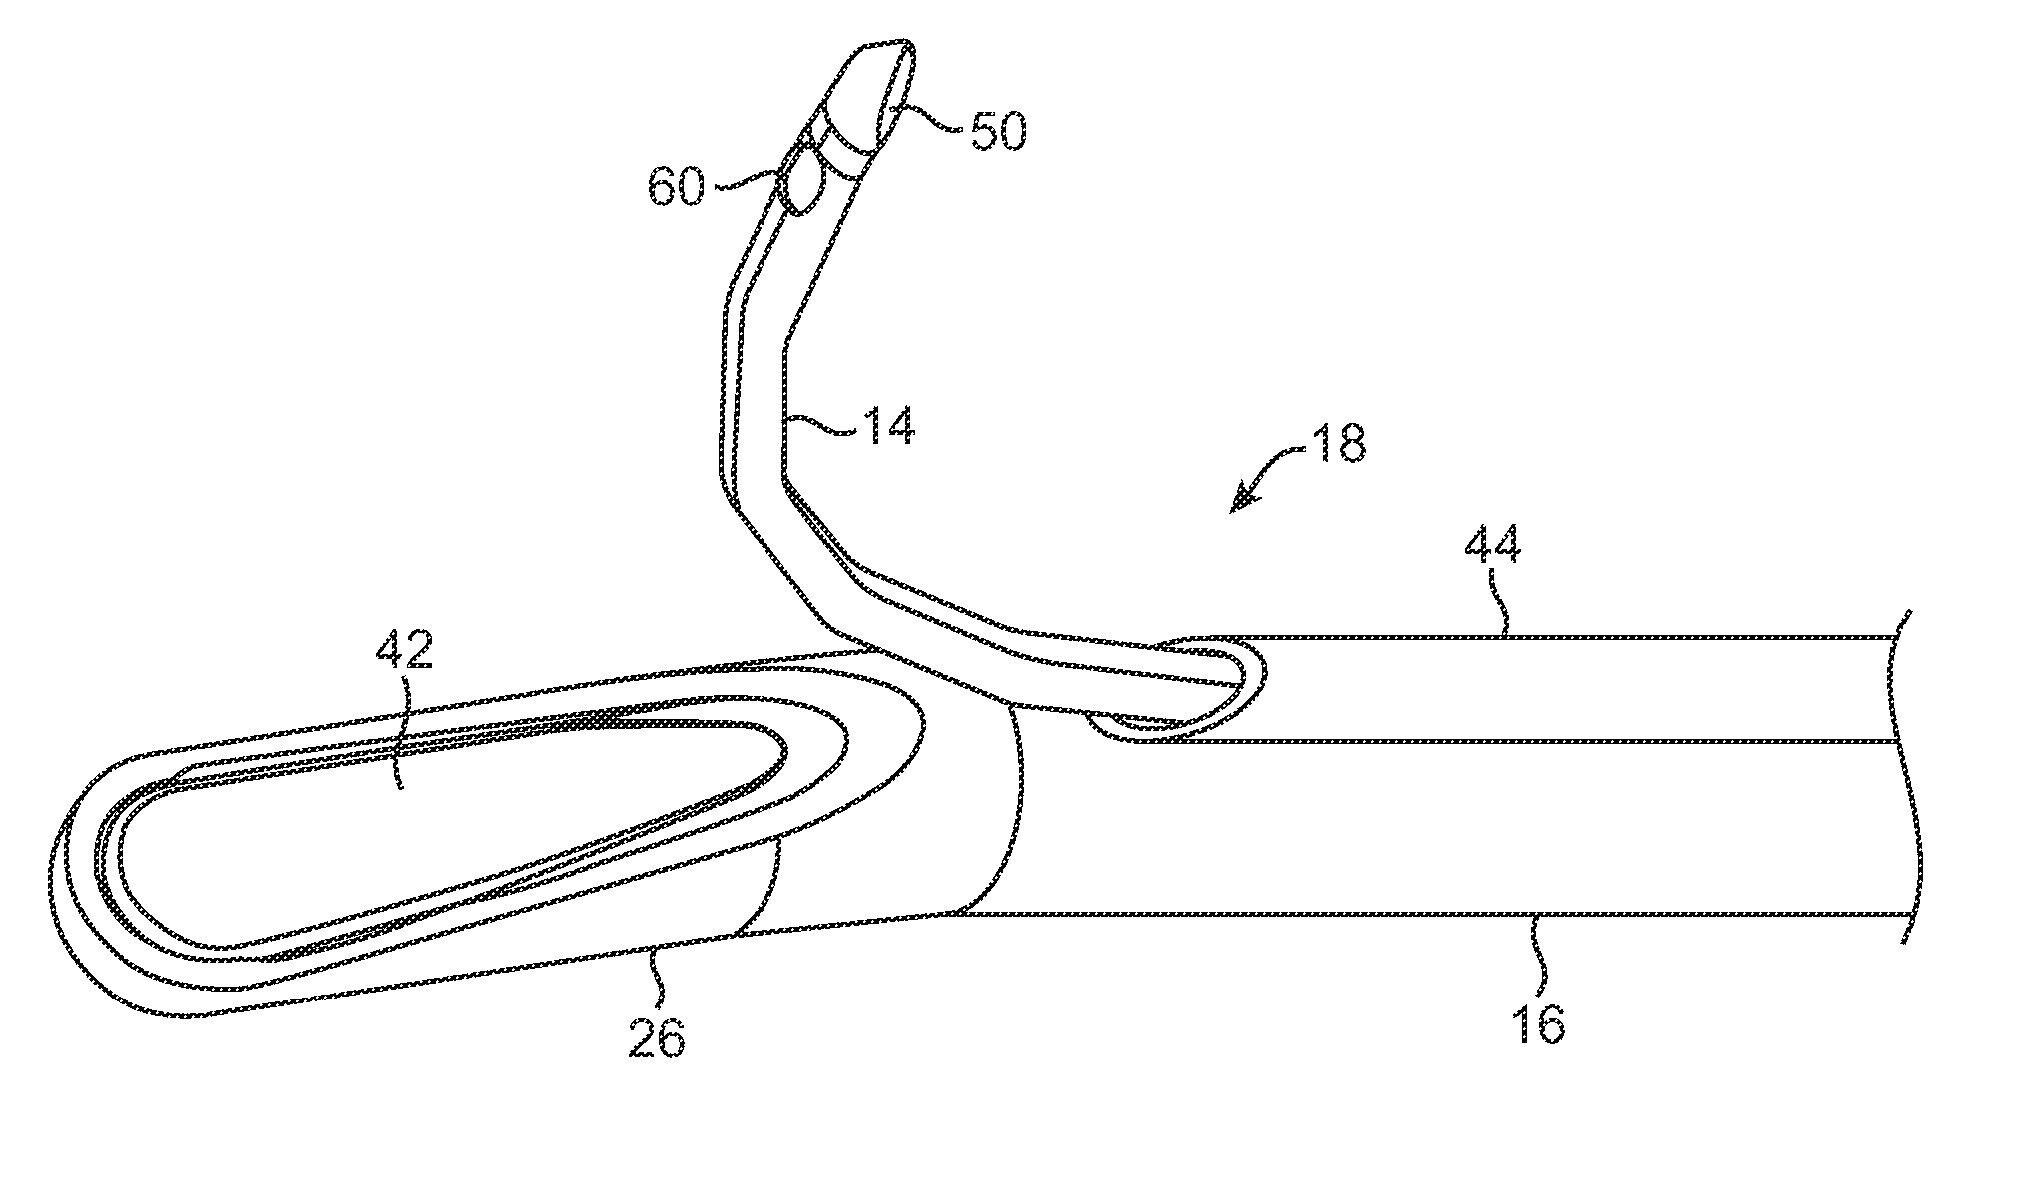 Rigid delivery systems having inclined ultrasound and needle